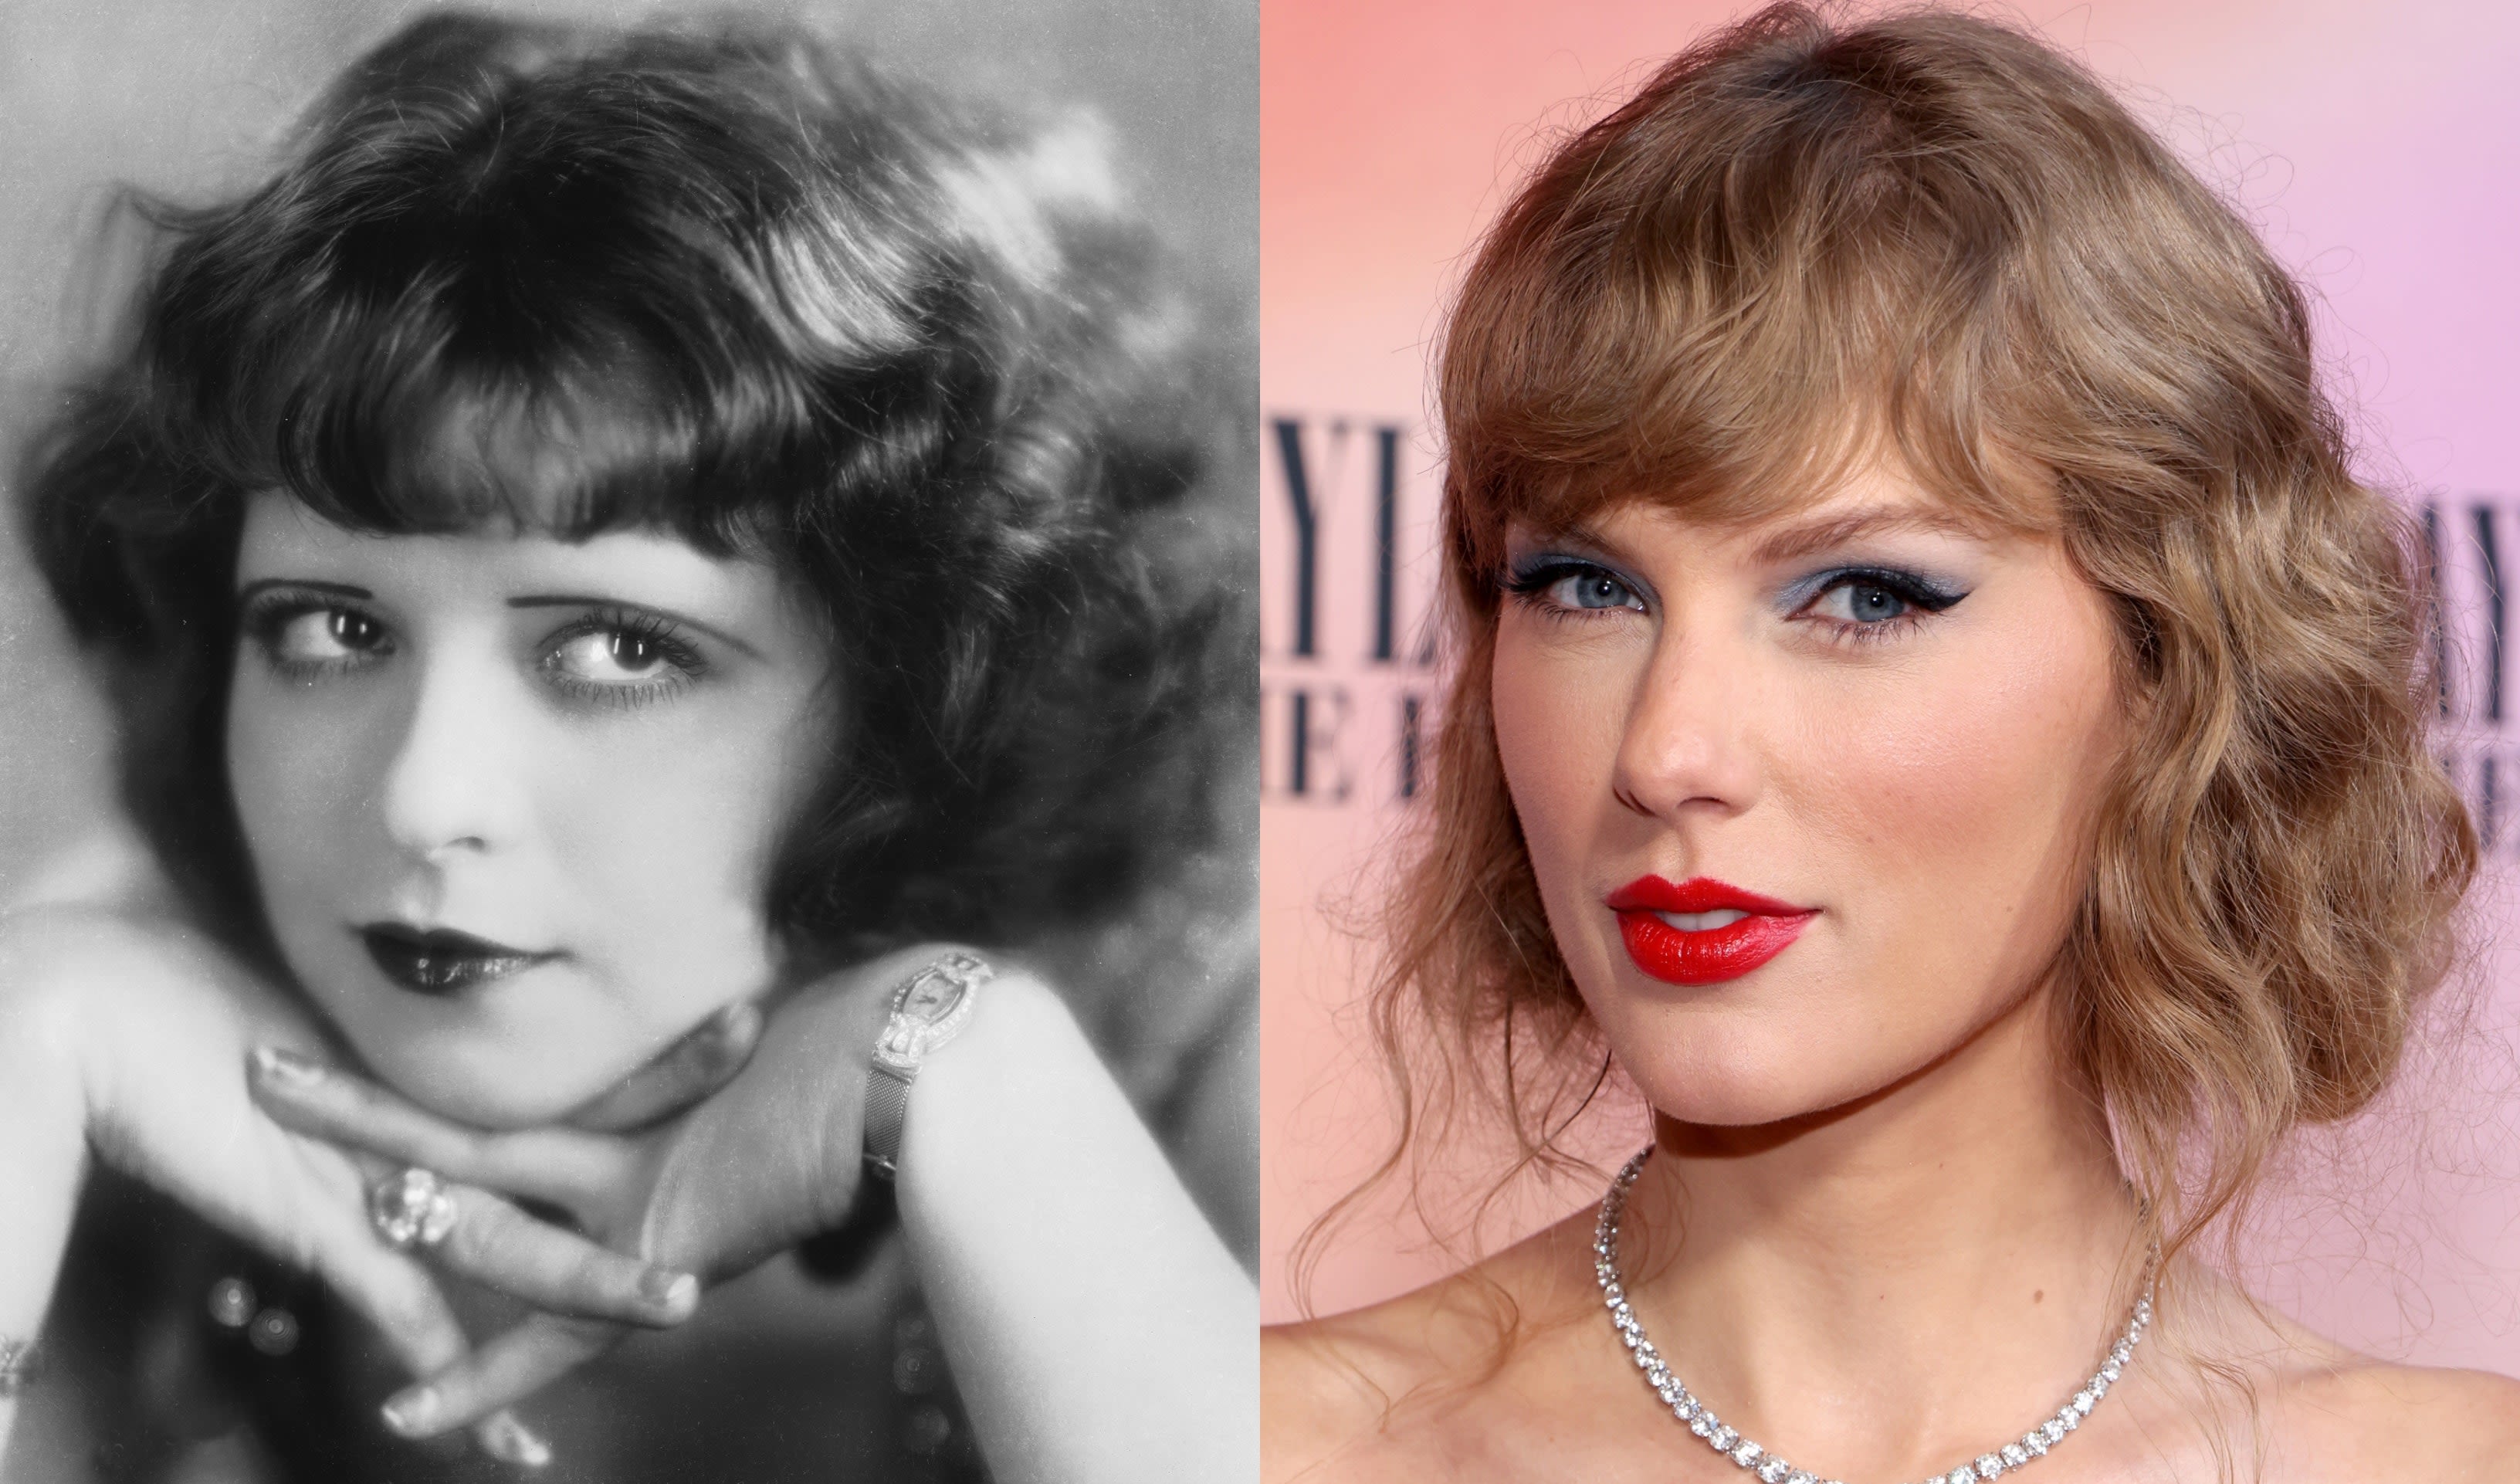 Who Was Clara Bow? The Real Story of Taylor Swift’s Tortured Poets Department Heroine